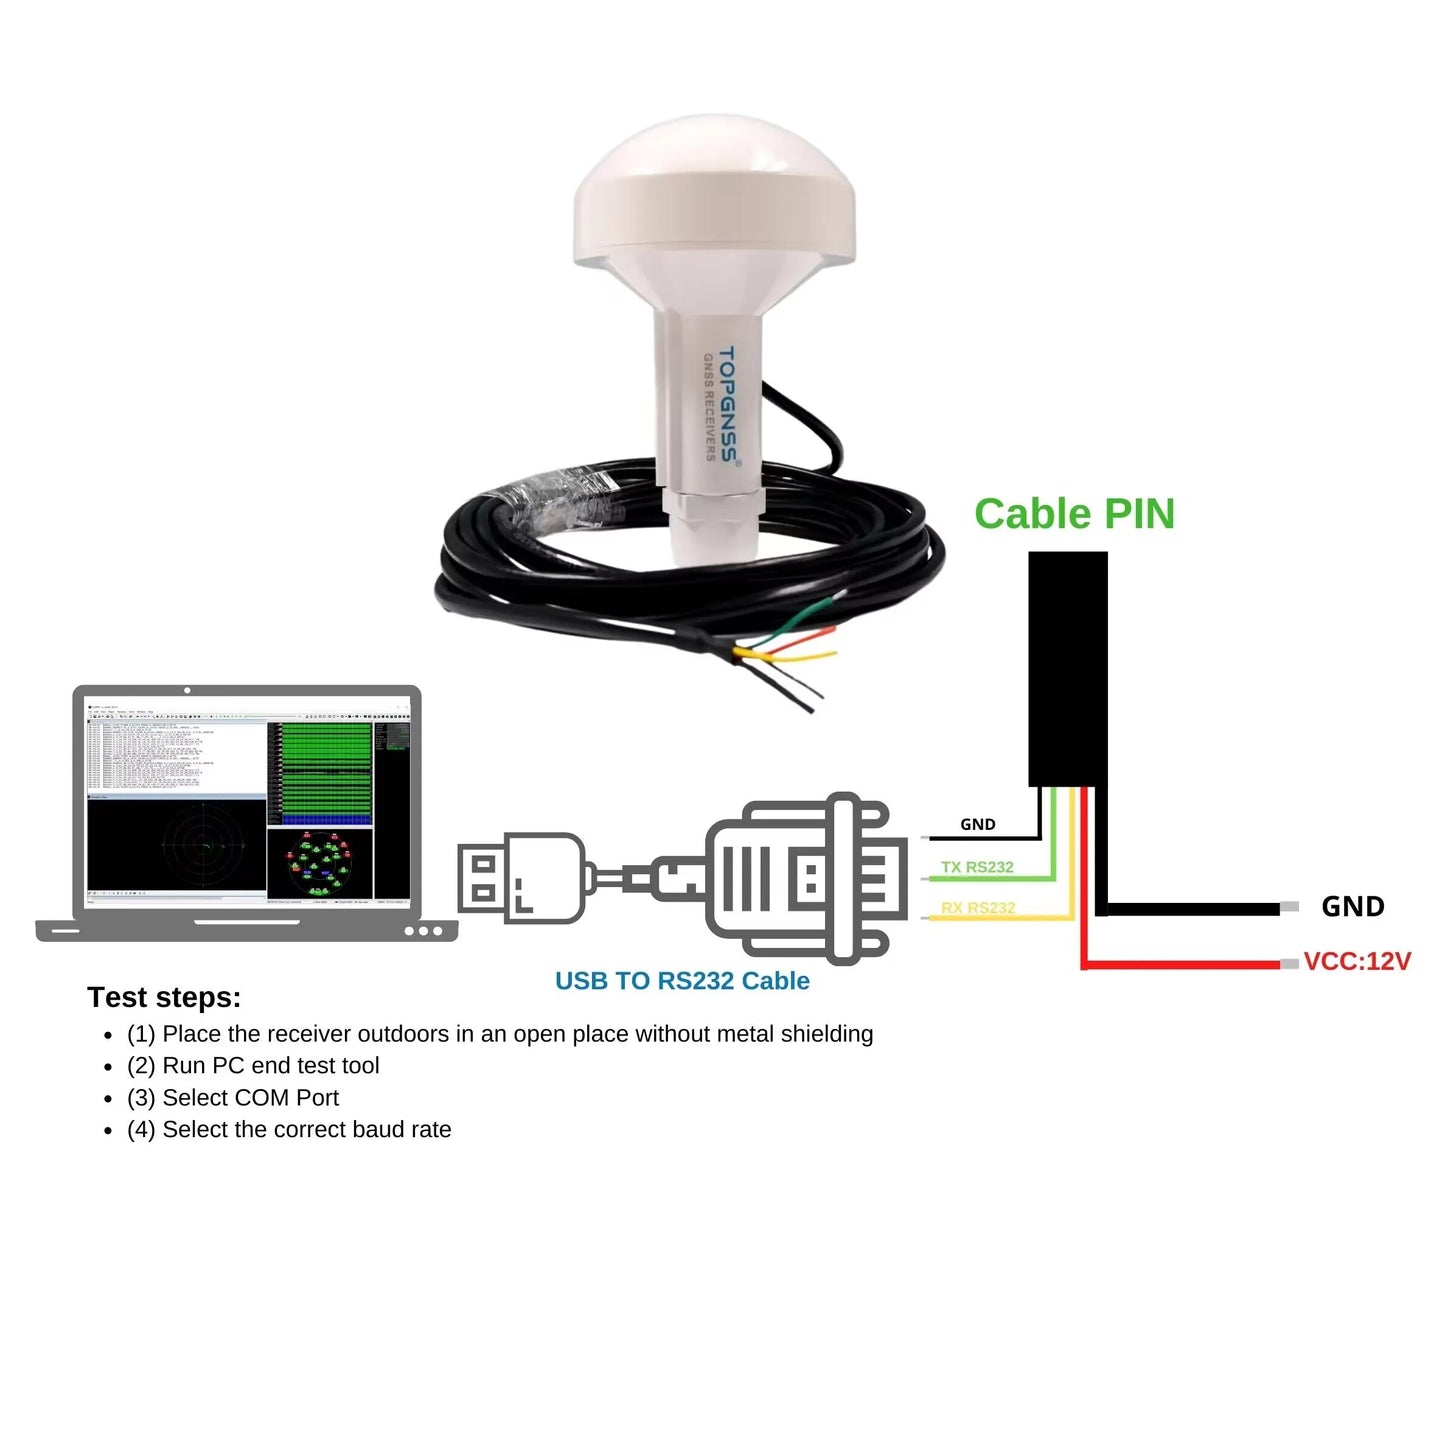 TOPGNSS RS232 GPS marine GPS receiver antenna module NMEA 0183 baud rate 4800 voltage 12V  cable is 5 meters.